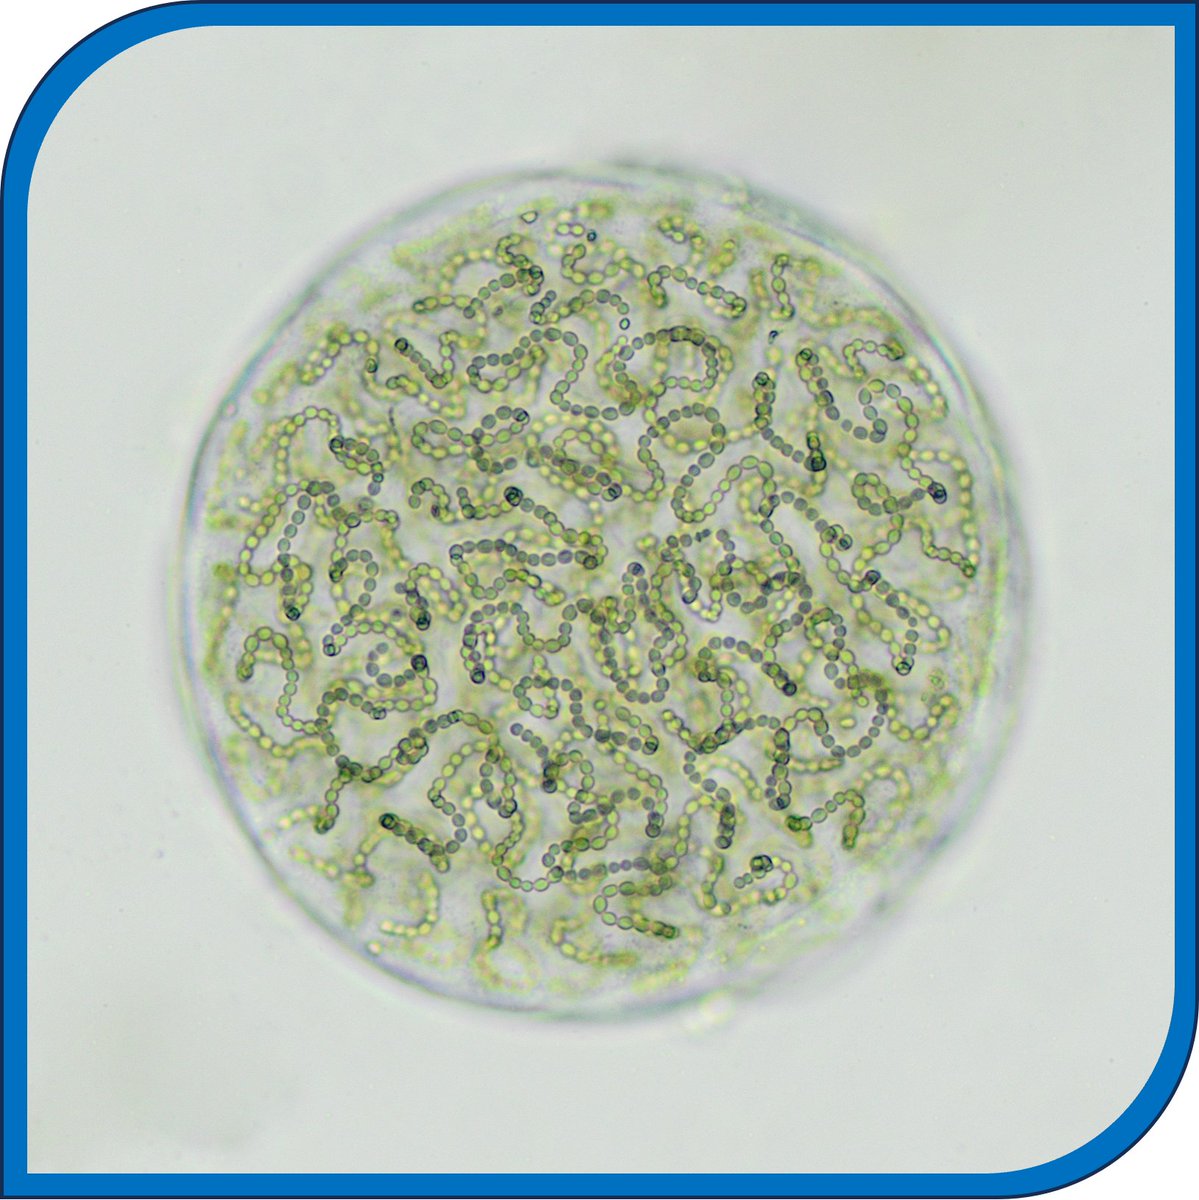 As #microbeofthemonth for March: Nostoc sp. (ULC 760)
A nitrogen-fixing #cyanobacteria found in a garden in Portugal. 
Many Nostoc species produce natural products with antimicrobial & anticancer activity.

bccm.belspo.be/catalogues/bm-…

#microbiology 

@belspo @ULiegeRecherche